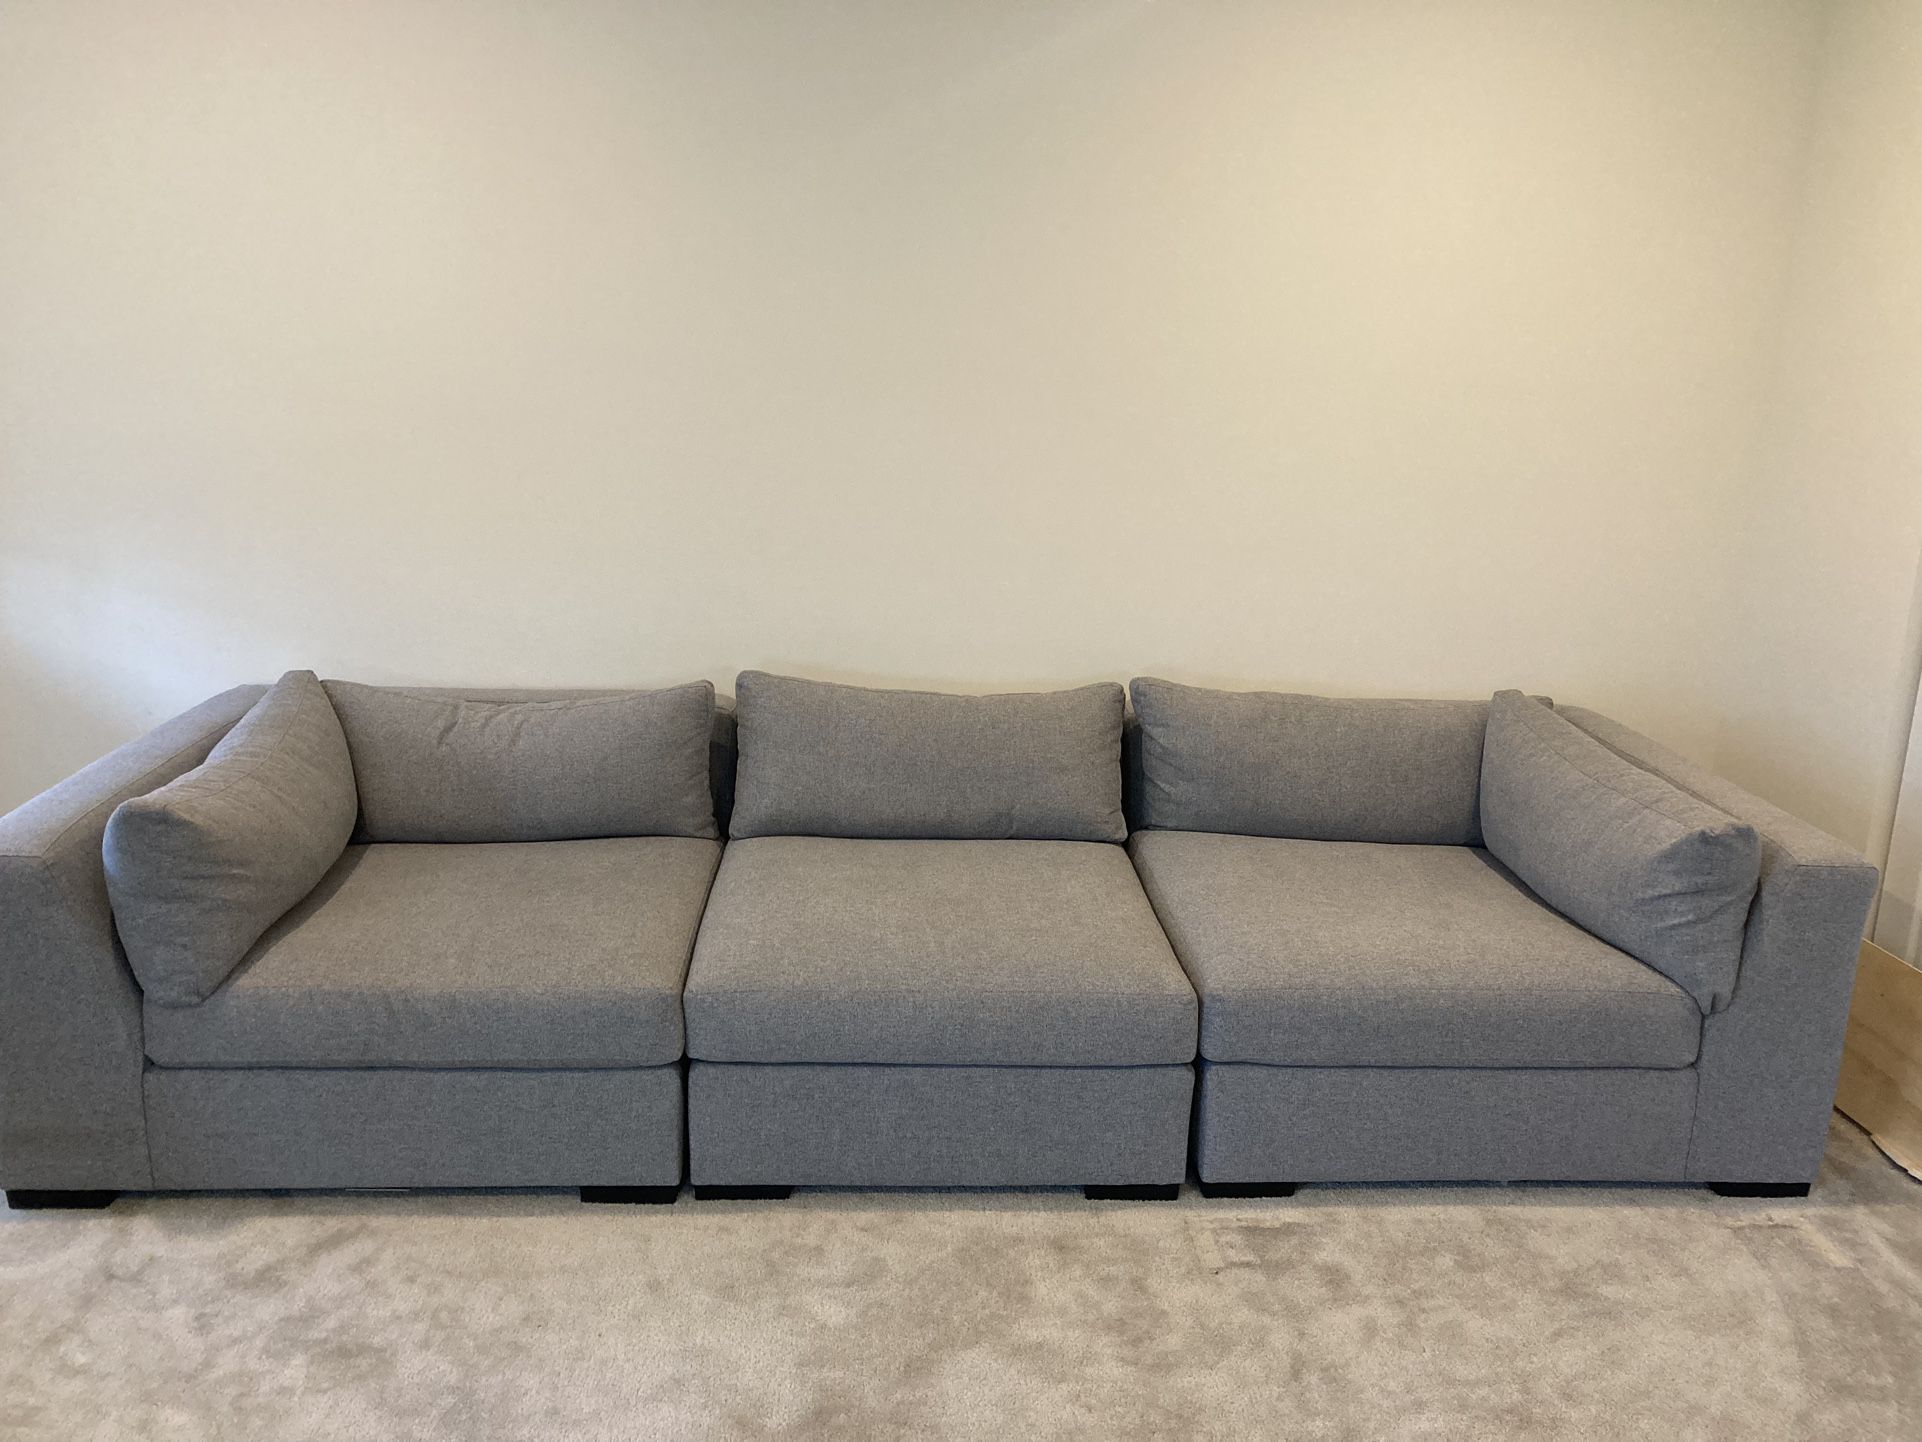 Modular Couch Sectional Sofa Modular Gray Couch Gray Sectional